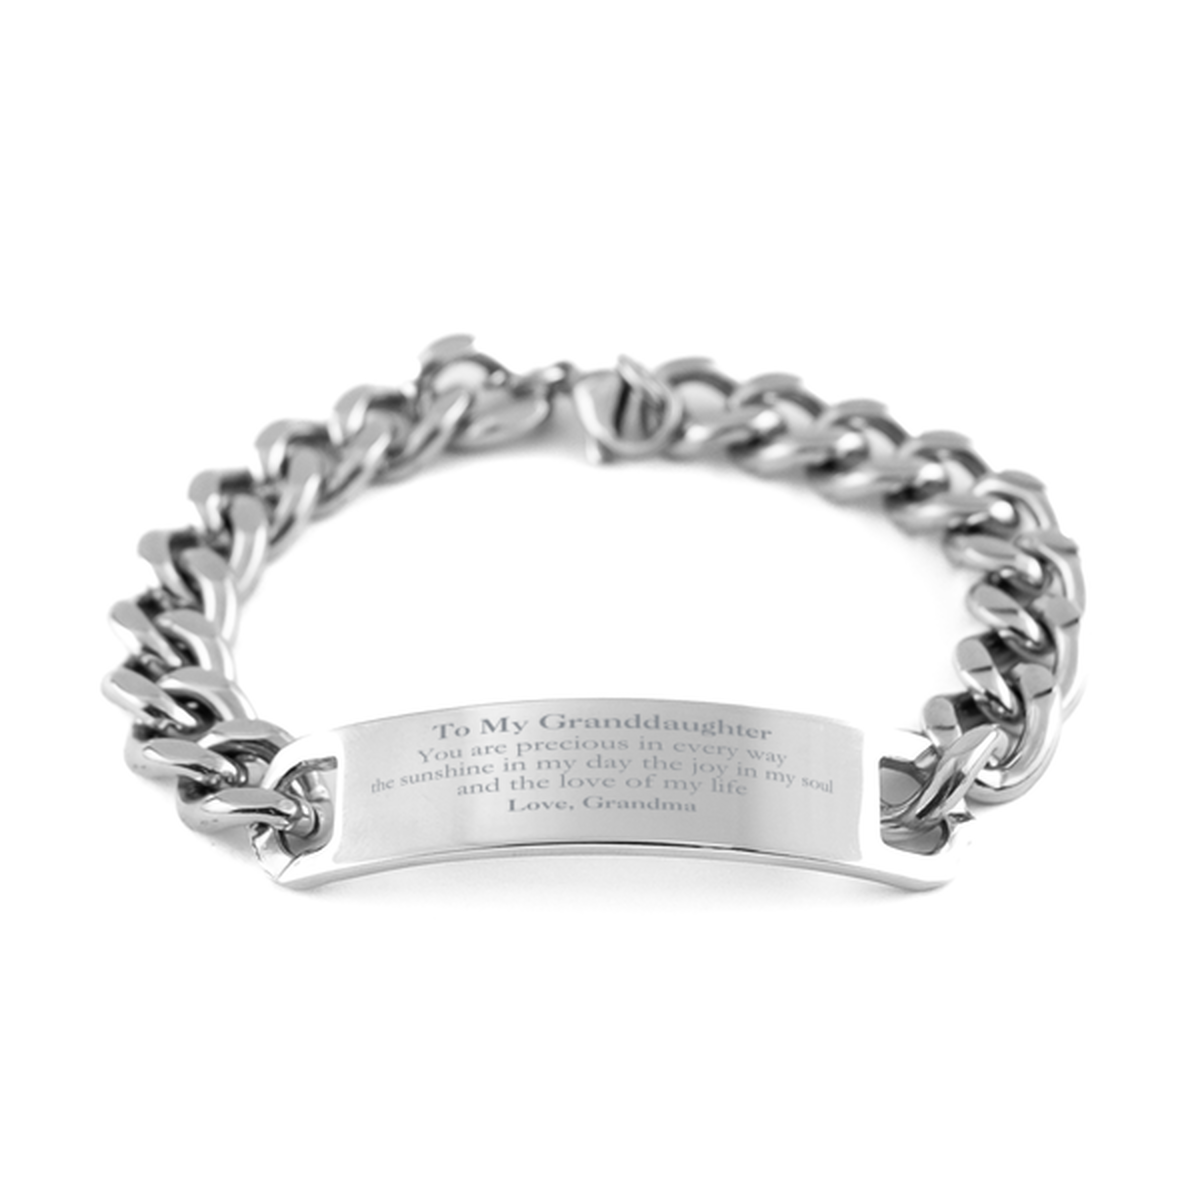 Graduation Gifts for Granddaughter Cuban Chain Stainless Steel Bracelet Present from Grandma, Christmas Granddaughter Birthday Gifts Granddaughter You are precious in every way the sunshine in my day. Love, Grandma